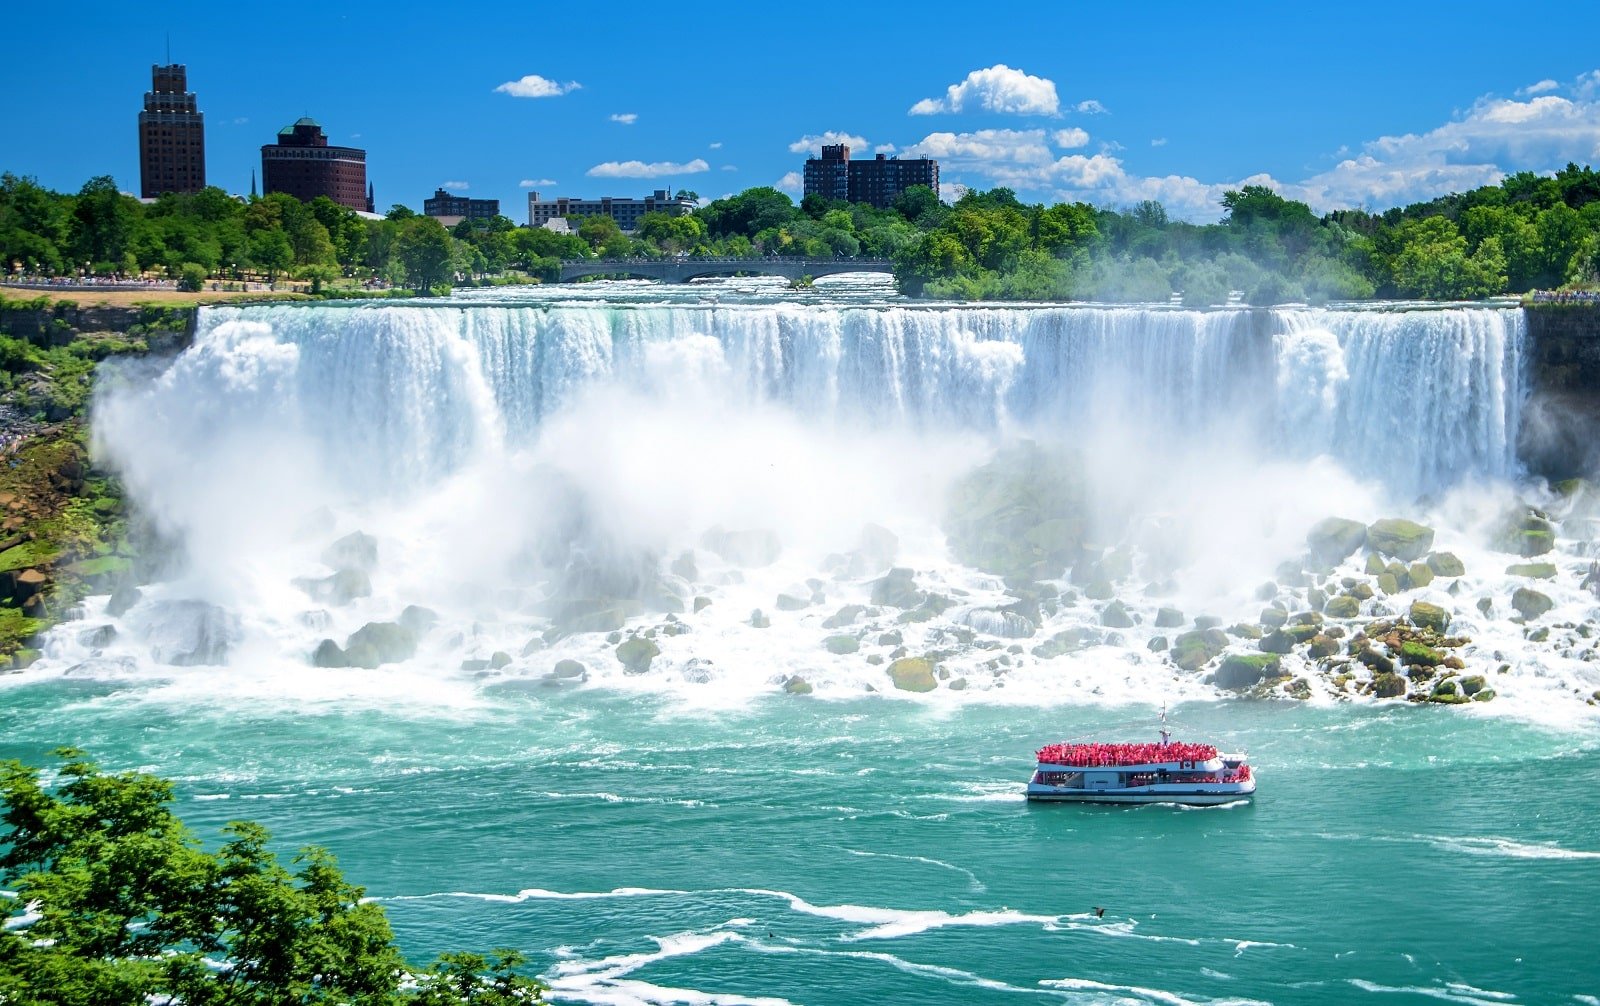 <p><span>Embark on a journey to Niagara Falls, where the sheer power of nature is on full display. These massive waterfalls, consisting of the American Falls, Bridal Veil Falls, and the Canadian Horseshoe Falls, offer a variety of experiences. The Maid of the Mist boat tour provides an up-close encounter where the roar and mist of the falls are overwhelming. Visit the observation decks or the Journey Behind the Falls for a different perspective. In the evening, the falls are lit up in a spectrum of colors, creating a breathtaking sight. The surrounding area also offers parks, gardens, and numerous vantage points to appreciate the falls’ majesty.</span></p> <p><b>Insider’s Tip: </b><span>Visit during the off-season to avoid crowds. </span></p> <p><b>When To Travel: </b><span>Late spring or early fall for pleasant weather. </span></p> <p><b>How To Get There: </b><span>Easily accessible from Buffalo, New York, or Toronto, Canada.</span></p>